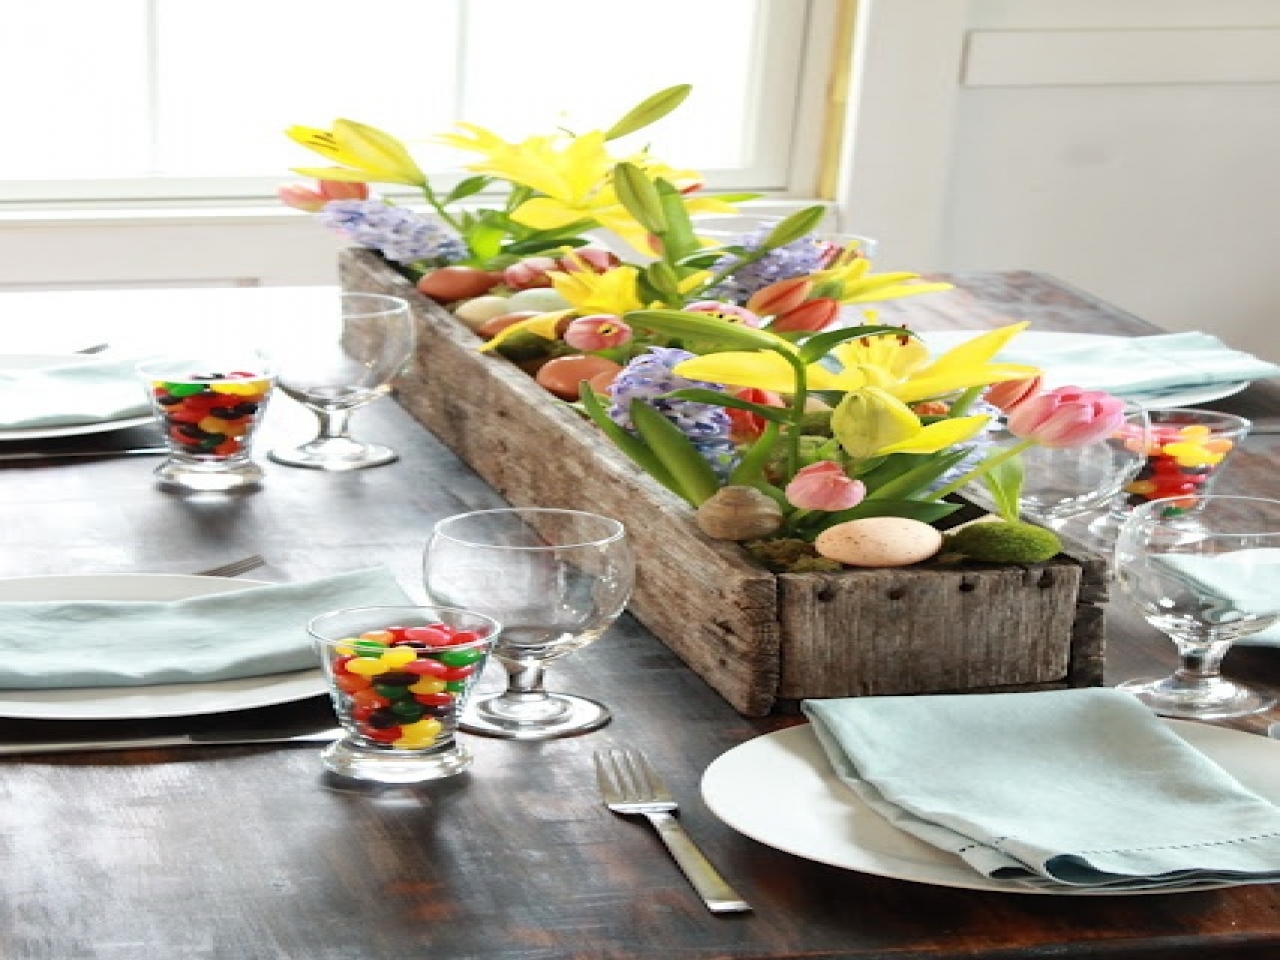 Diy easter decorations pinterest easter table decorations ideas 41be3d74300335e9.jpg